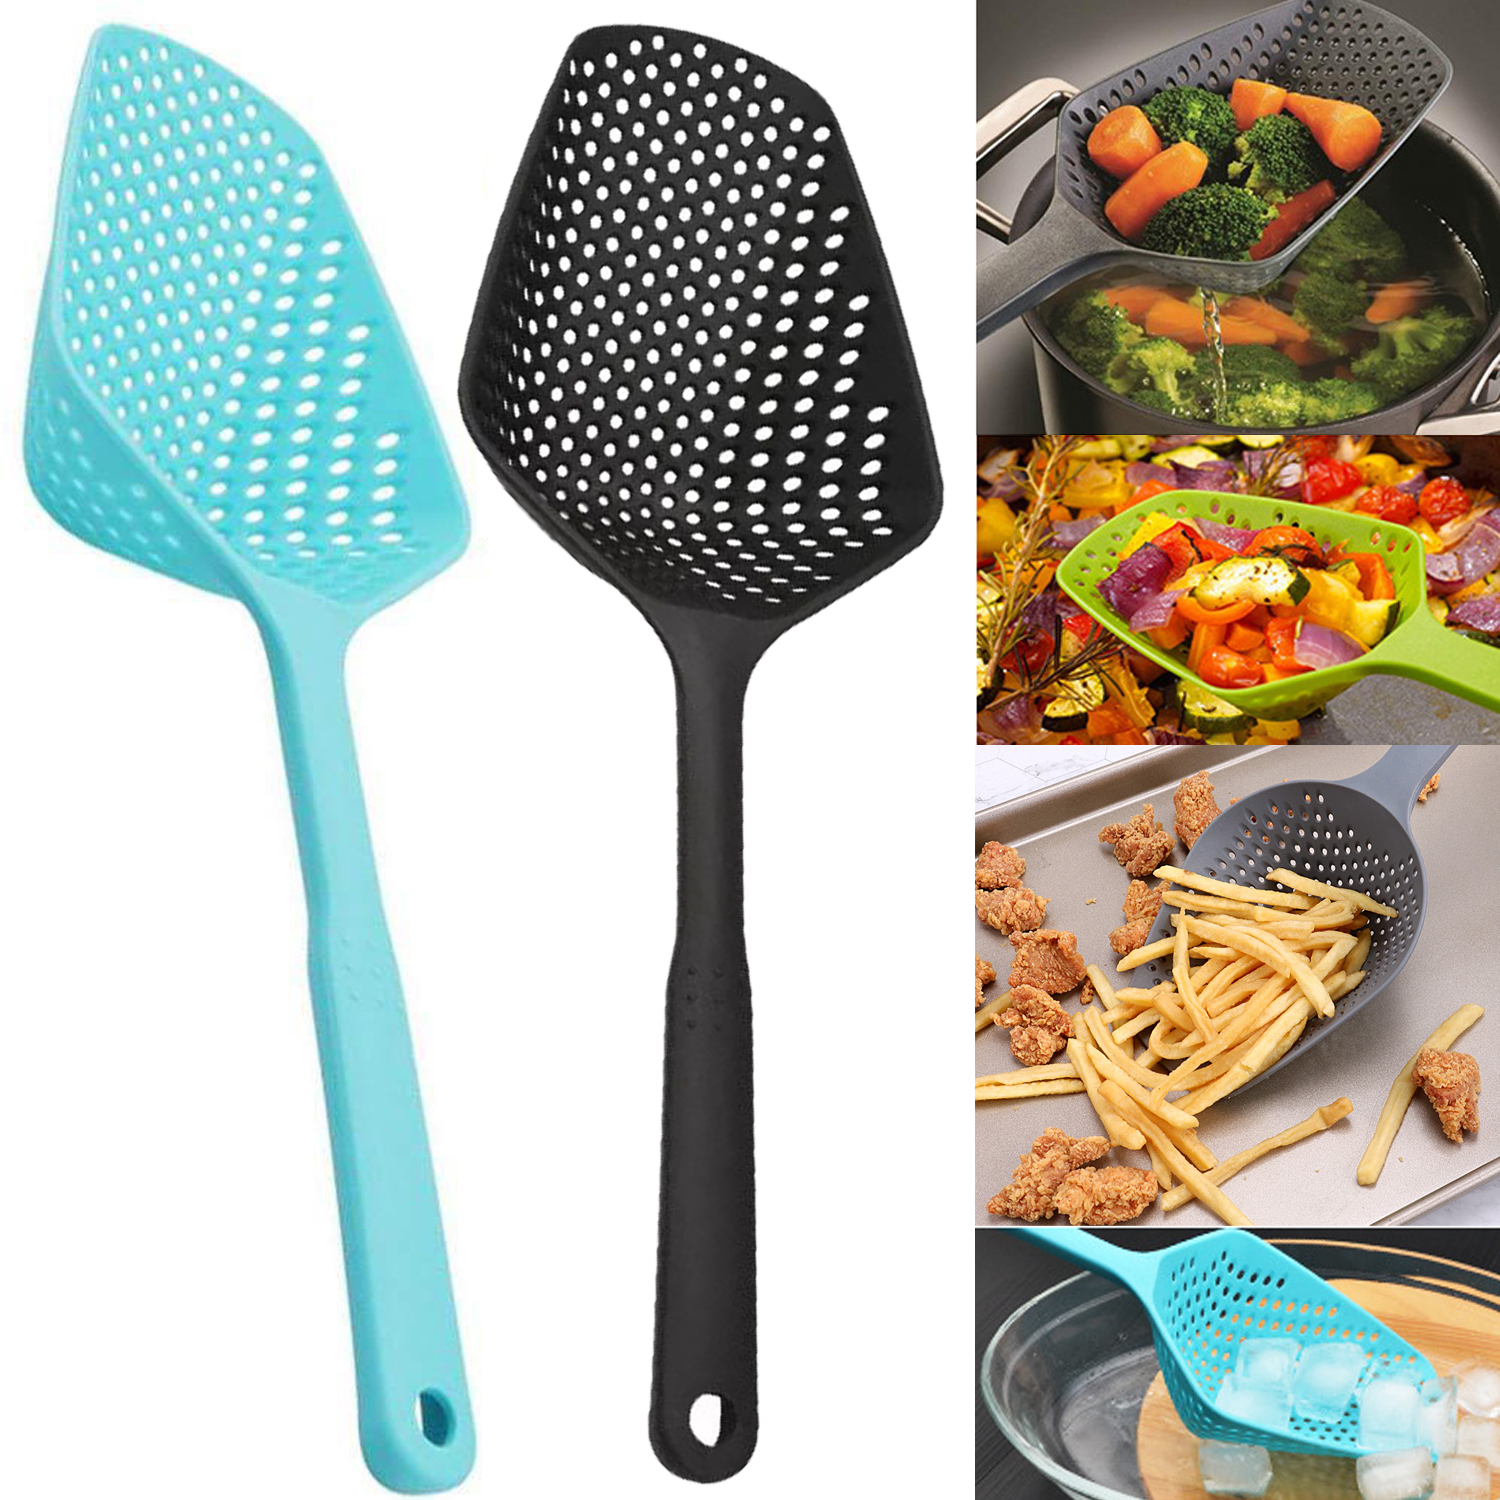 Portable Soup Spoon Strainer Nylon Kitchen Colourful Ladle Anti-scald Skimmer Fry Food Mesh Handy Filter Colanders Kitchen Tools